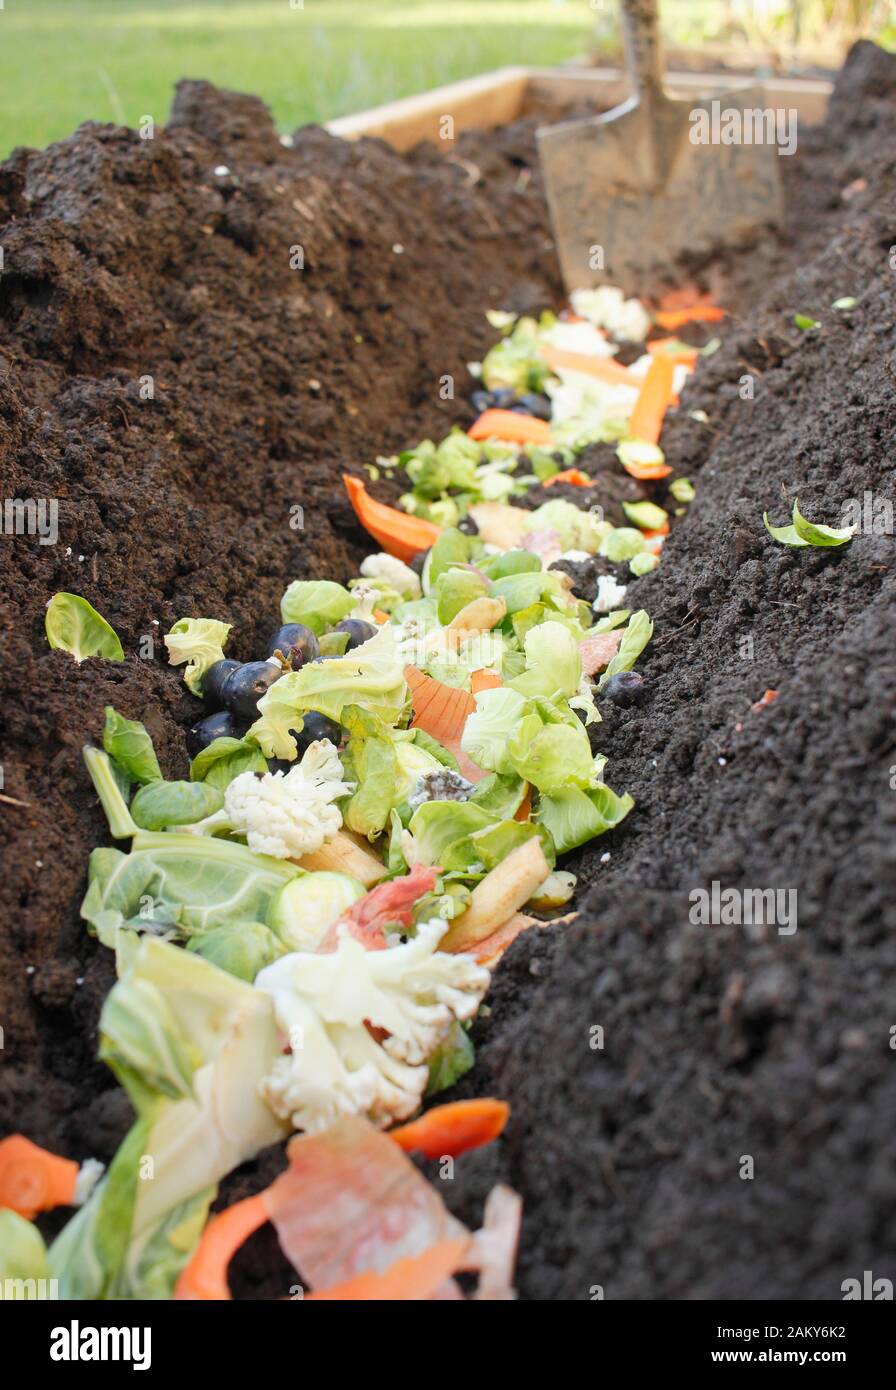 Green food waste placed directly into a vegetable patch trench to rot overwinter and give next season hungry crops a nutrient boost. UK Stock Photo